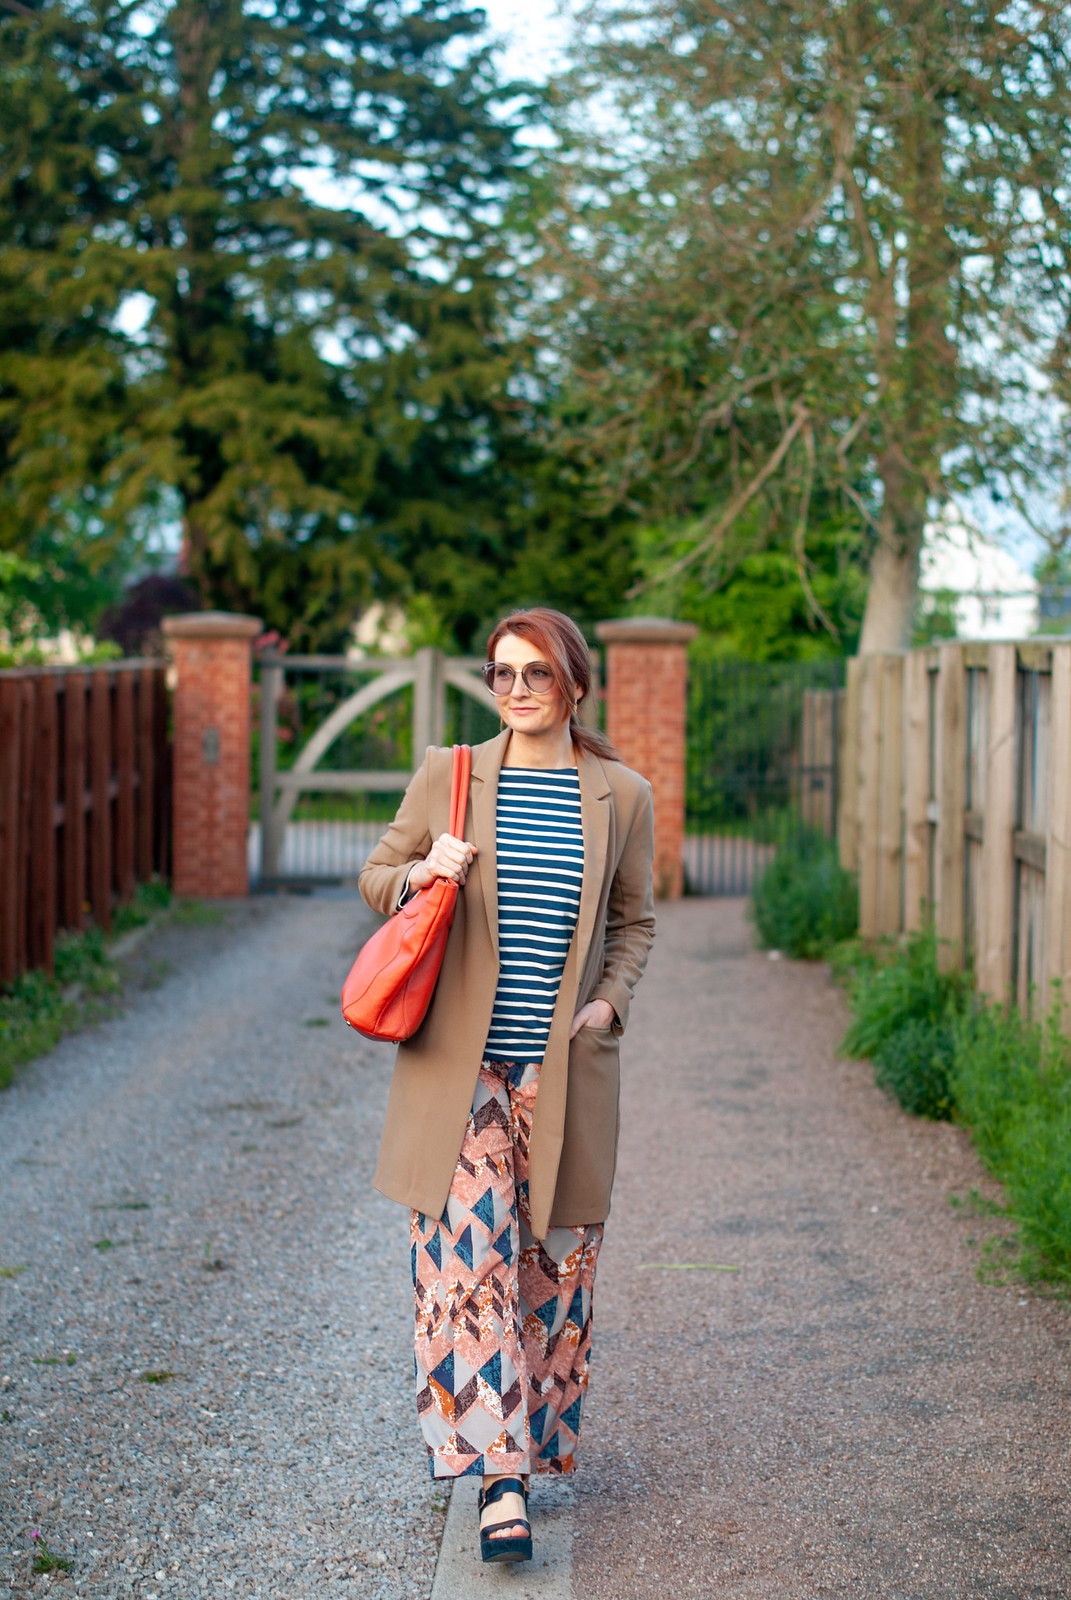 How to Create a Stylish Look With Loose-Fitting Pieces: Longline camel blazer \ navy stripe Breton top \ patterned wide leg trousers pants | Not Dressed As Lamb, over 40 style